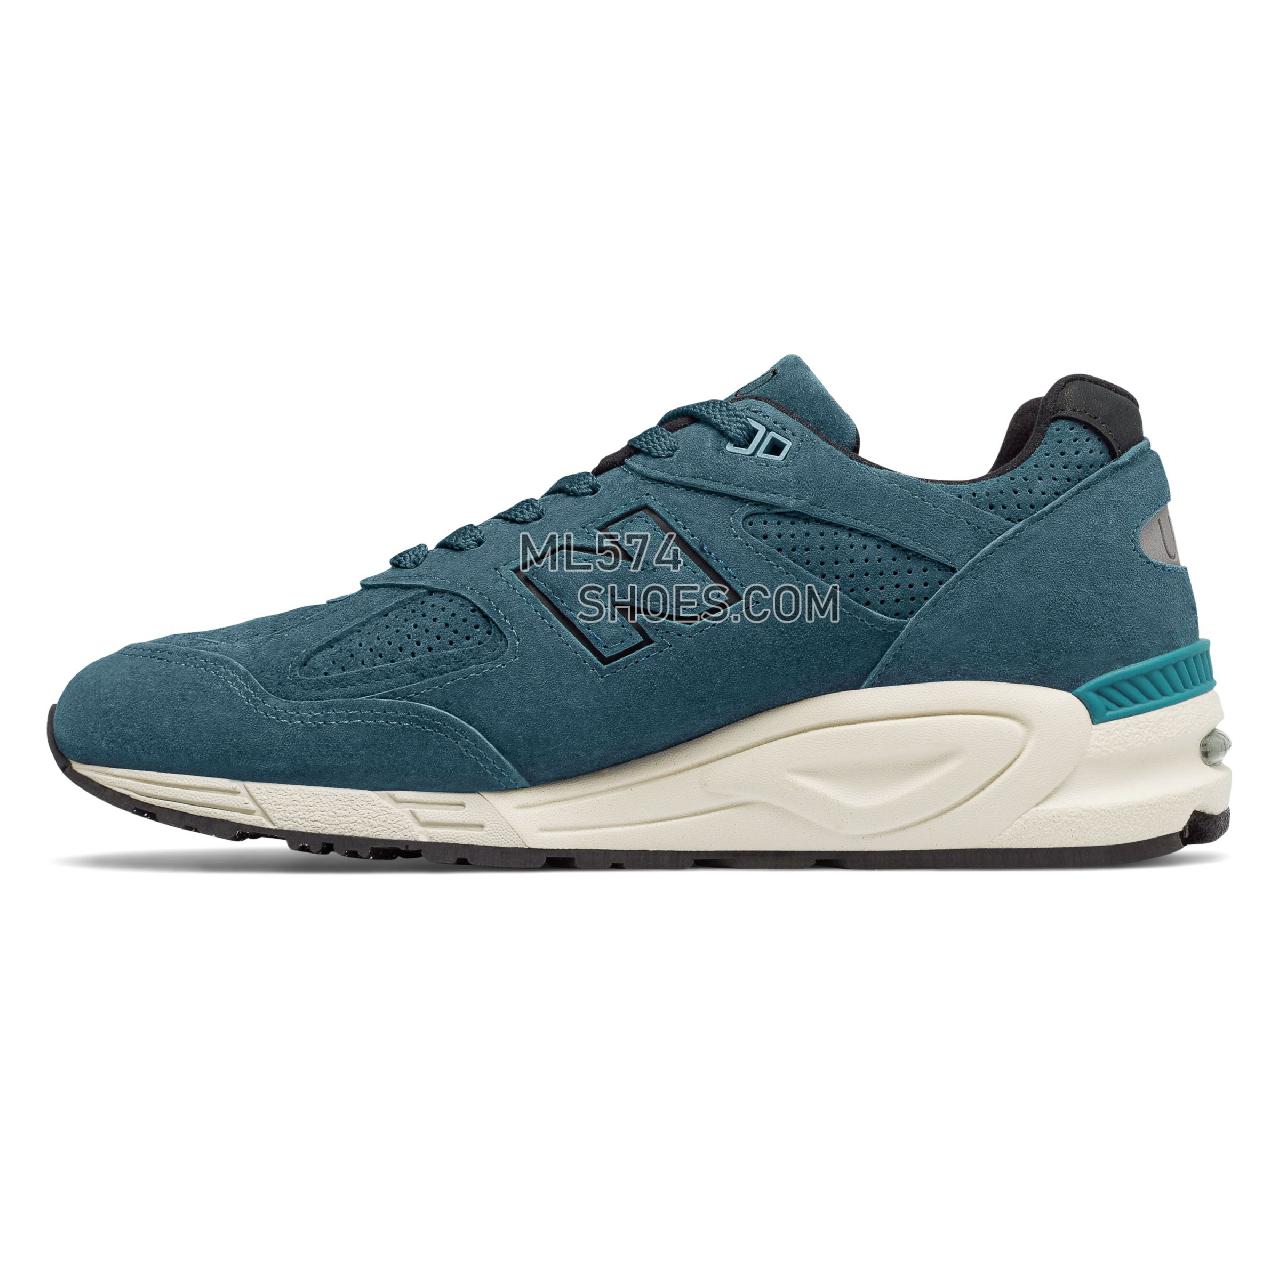 New Balance 990v2 Made in US Color Spectrum - Men's 990 - Classic North Sea with Moonbeam - M990CR2